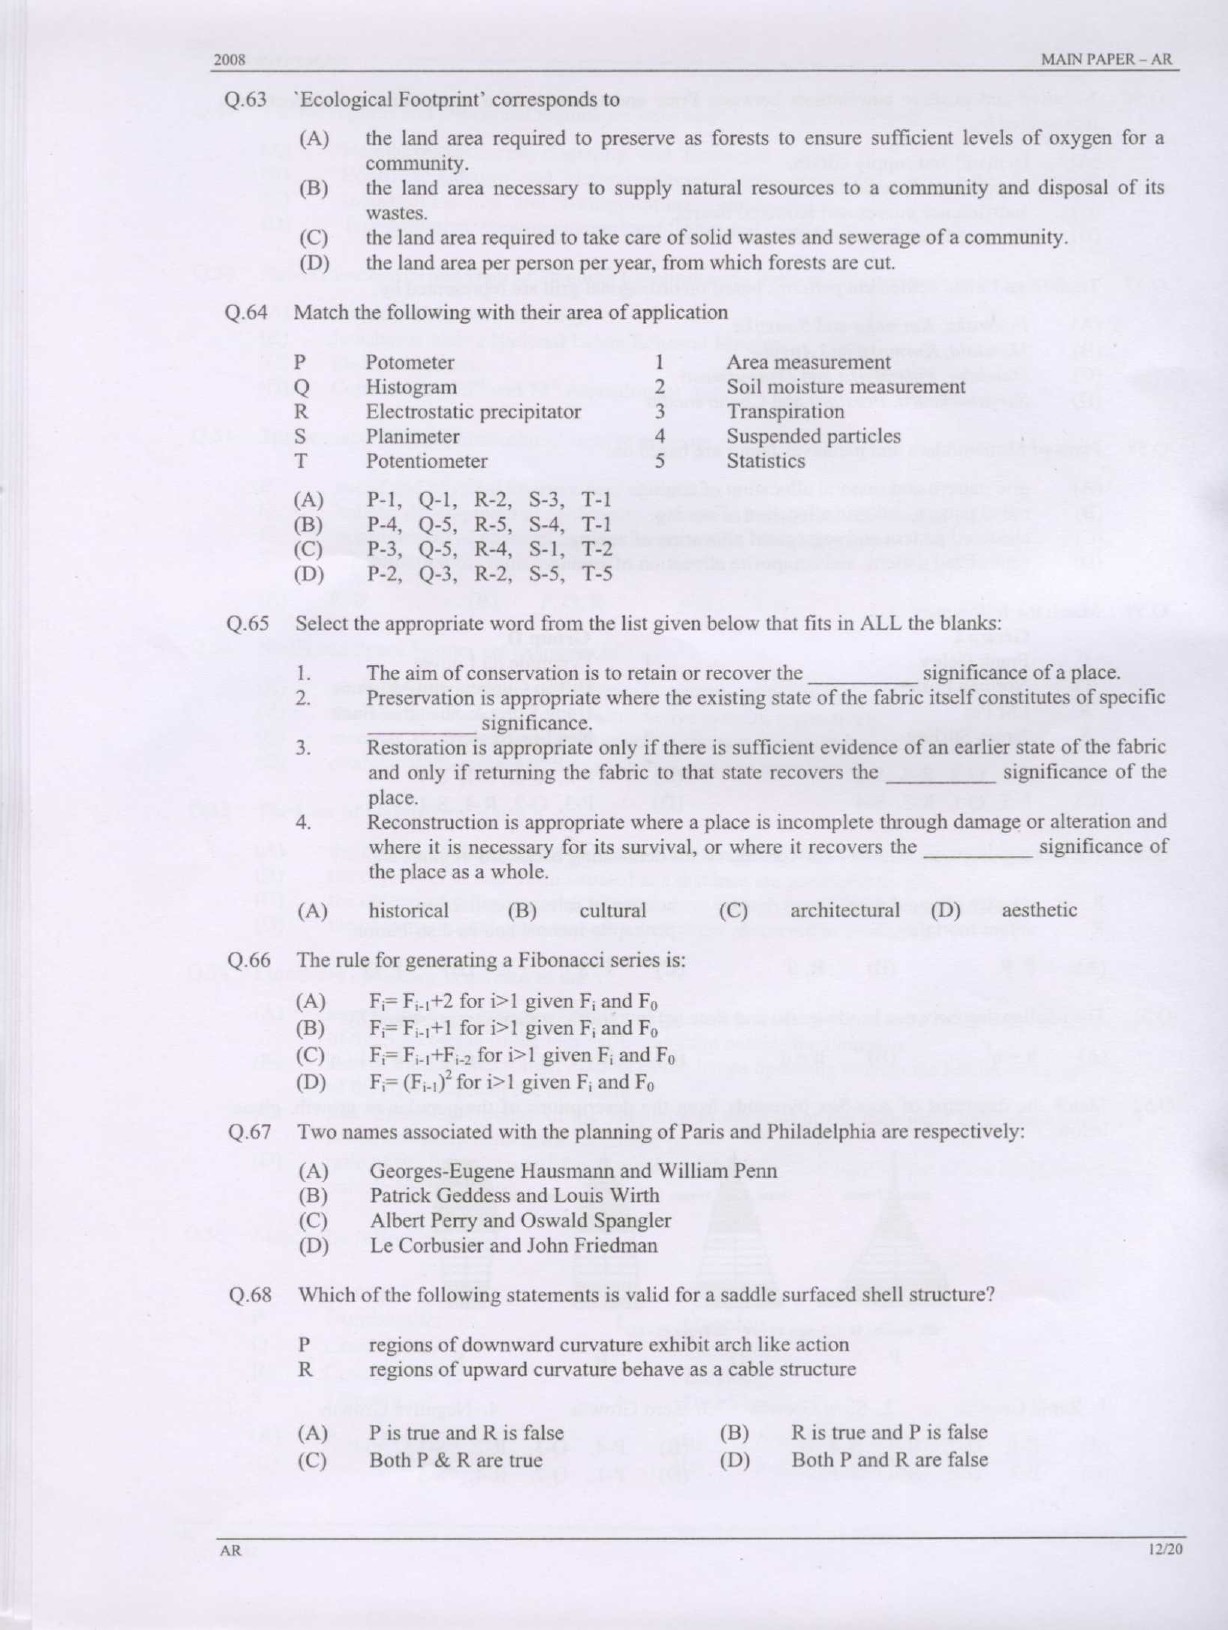 GATE Exam Question Paper 2008 Architecture and Planning 12